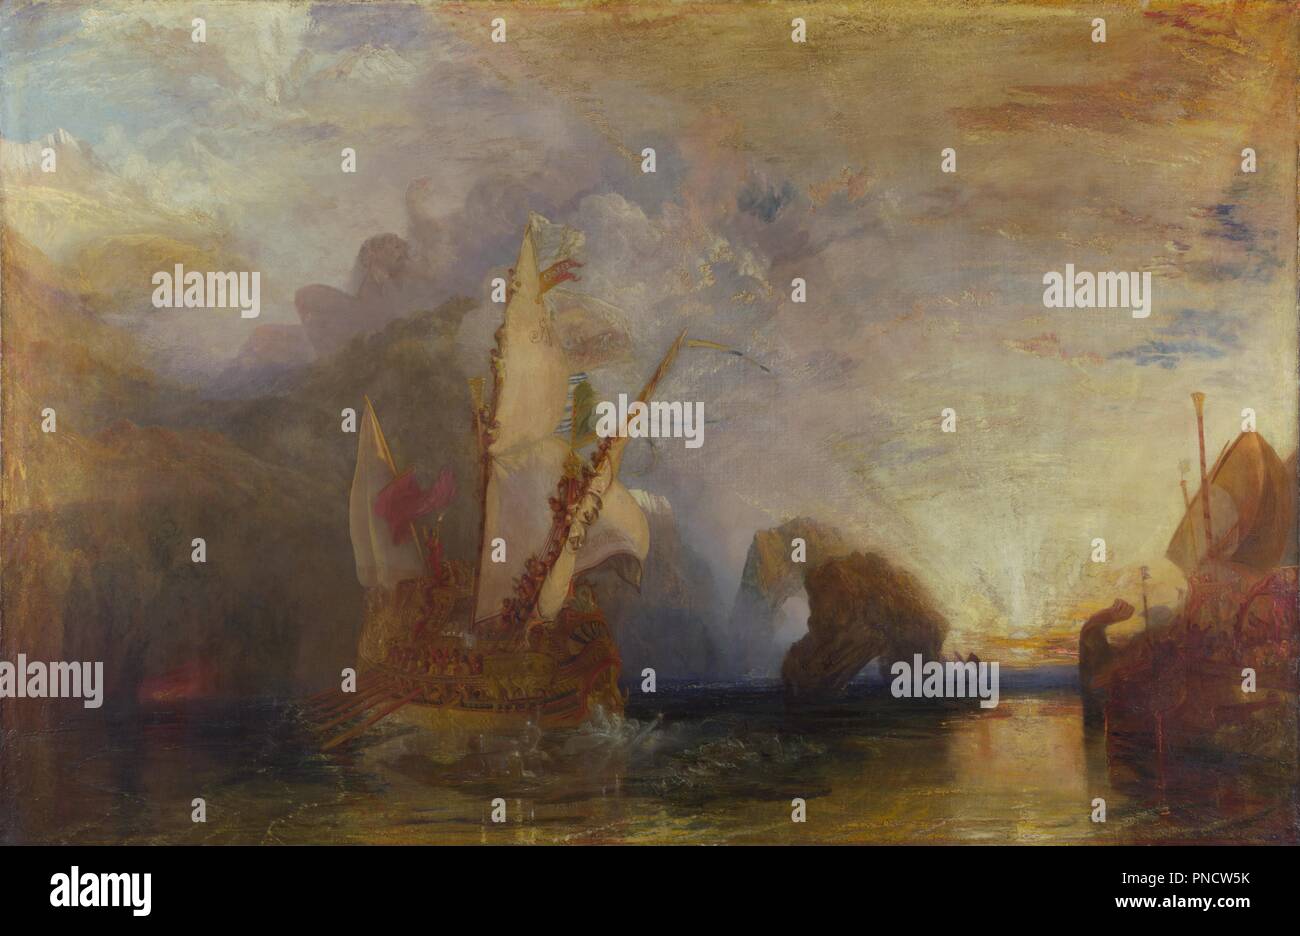 Ulysses deriding Polyphemus. Date/Period: 1829. Painting. Oil on canvas. Height: 132.5 cm (52.1 in); Width: 203 cm (79.9 in). Author: J. M. W. Turner. TURNER, JOSEPH MALLORD WILLIAM. Stock Photo